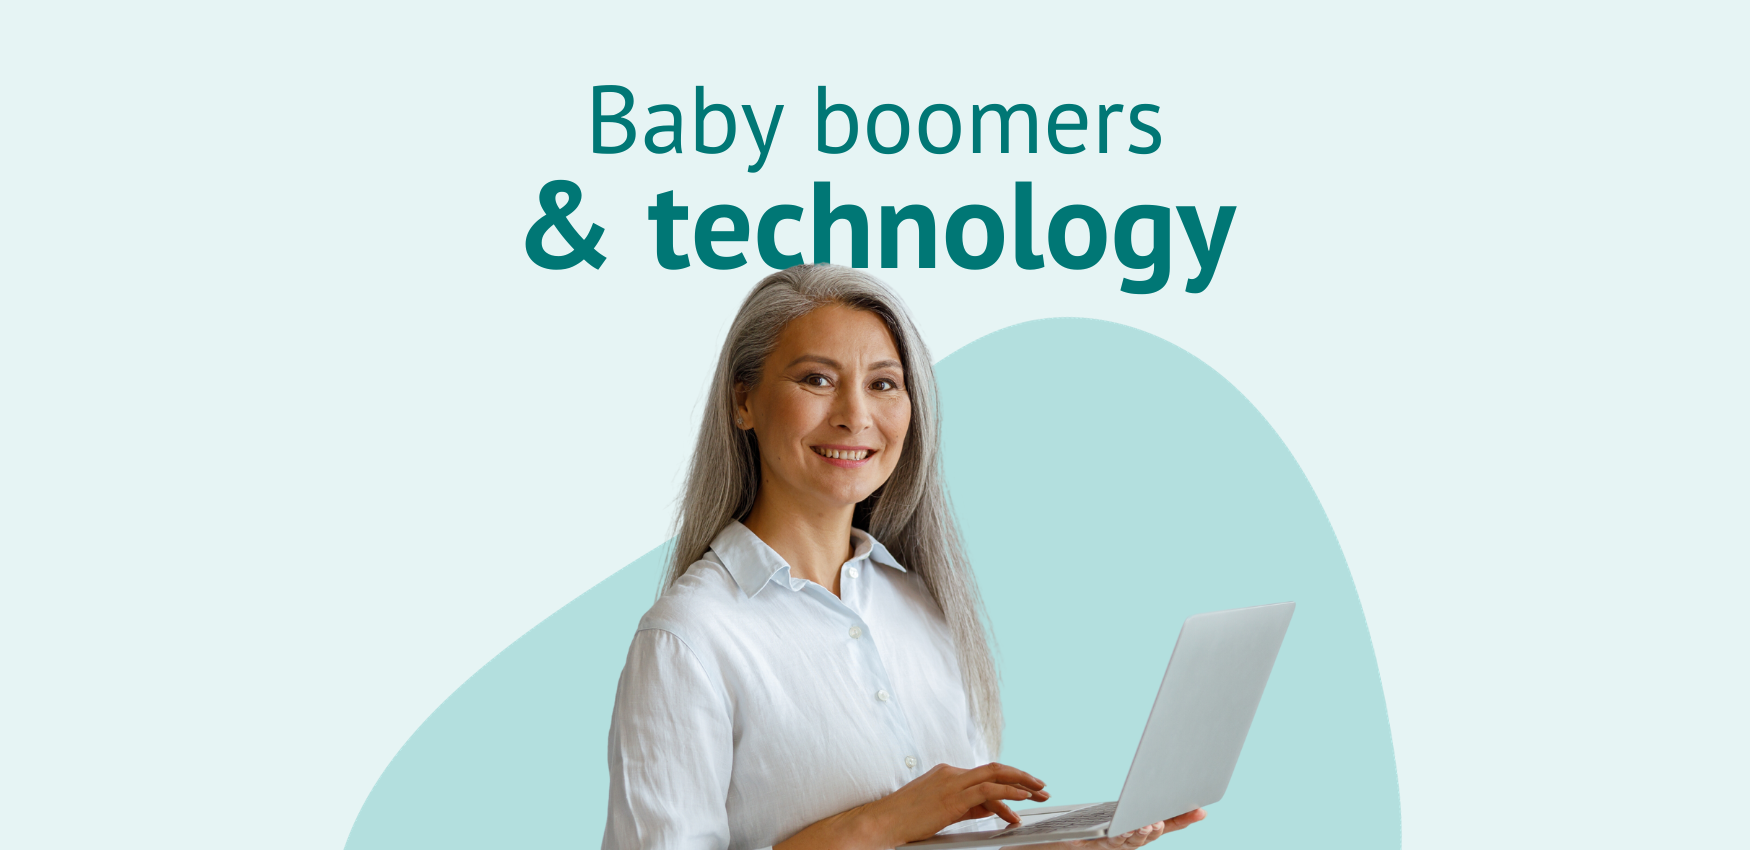 3 Huge Misconceptions about Baby Boomers and Technology